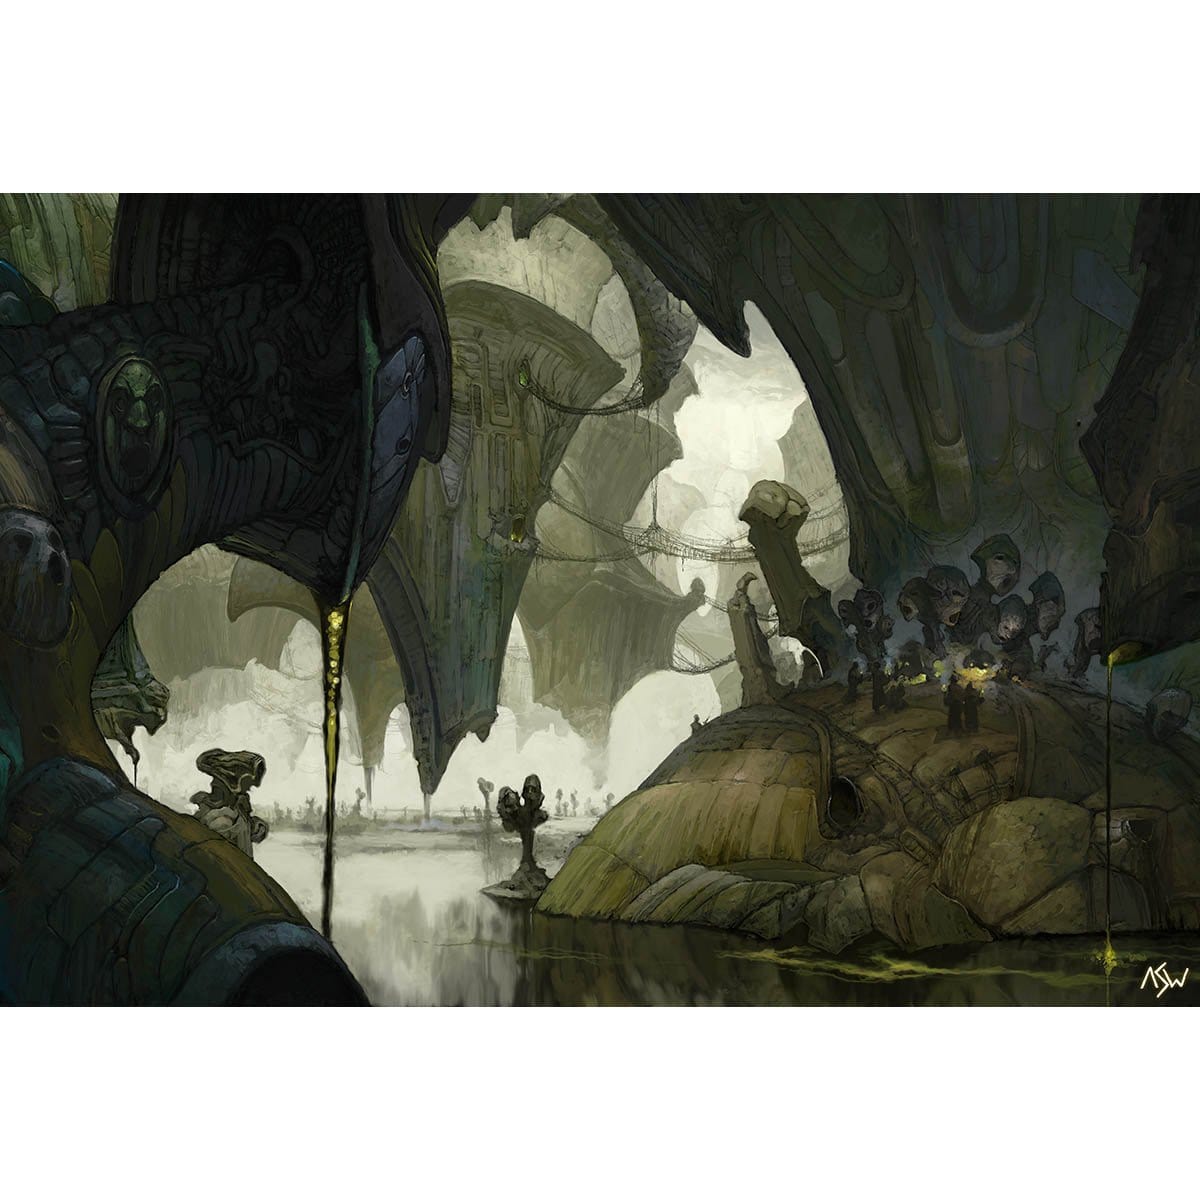 Swamp (Ravnica) Print - Print - Original Magic Art - Accessories for Magic the Gathering and other card games